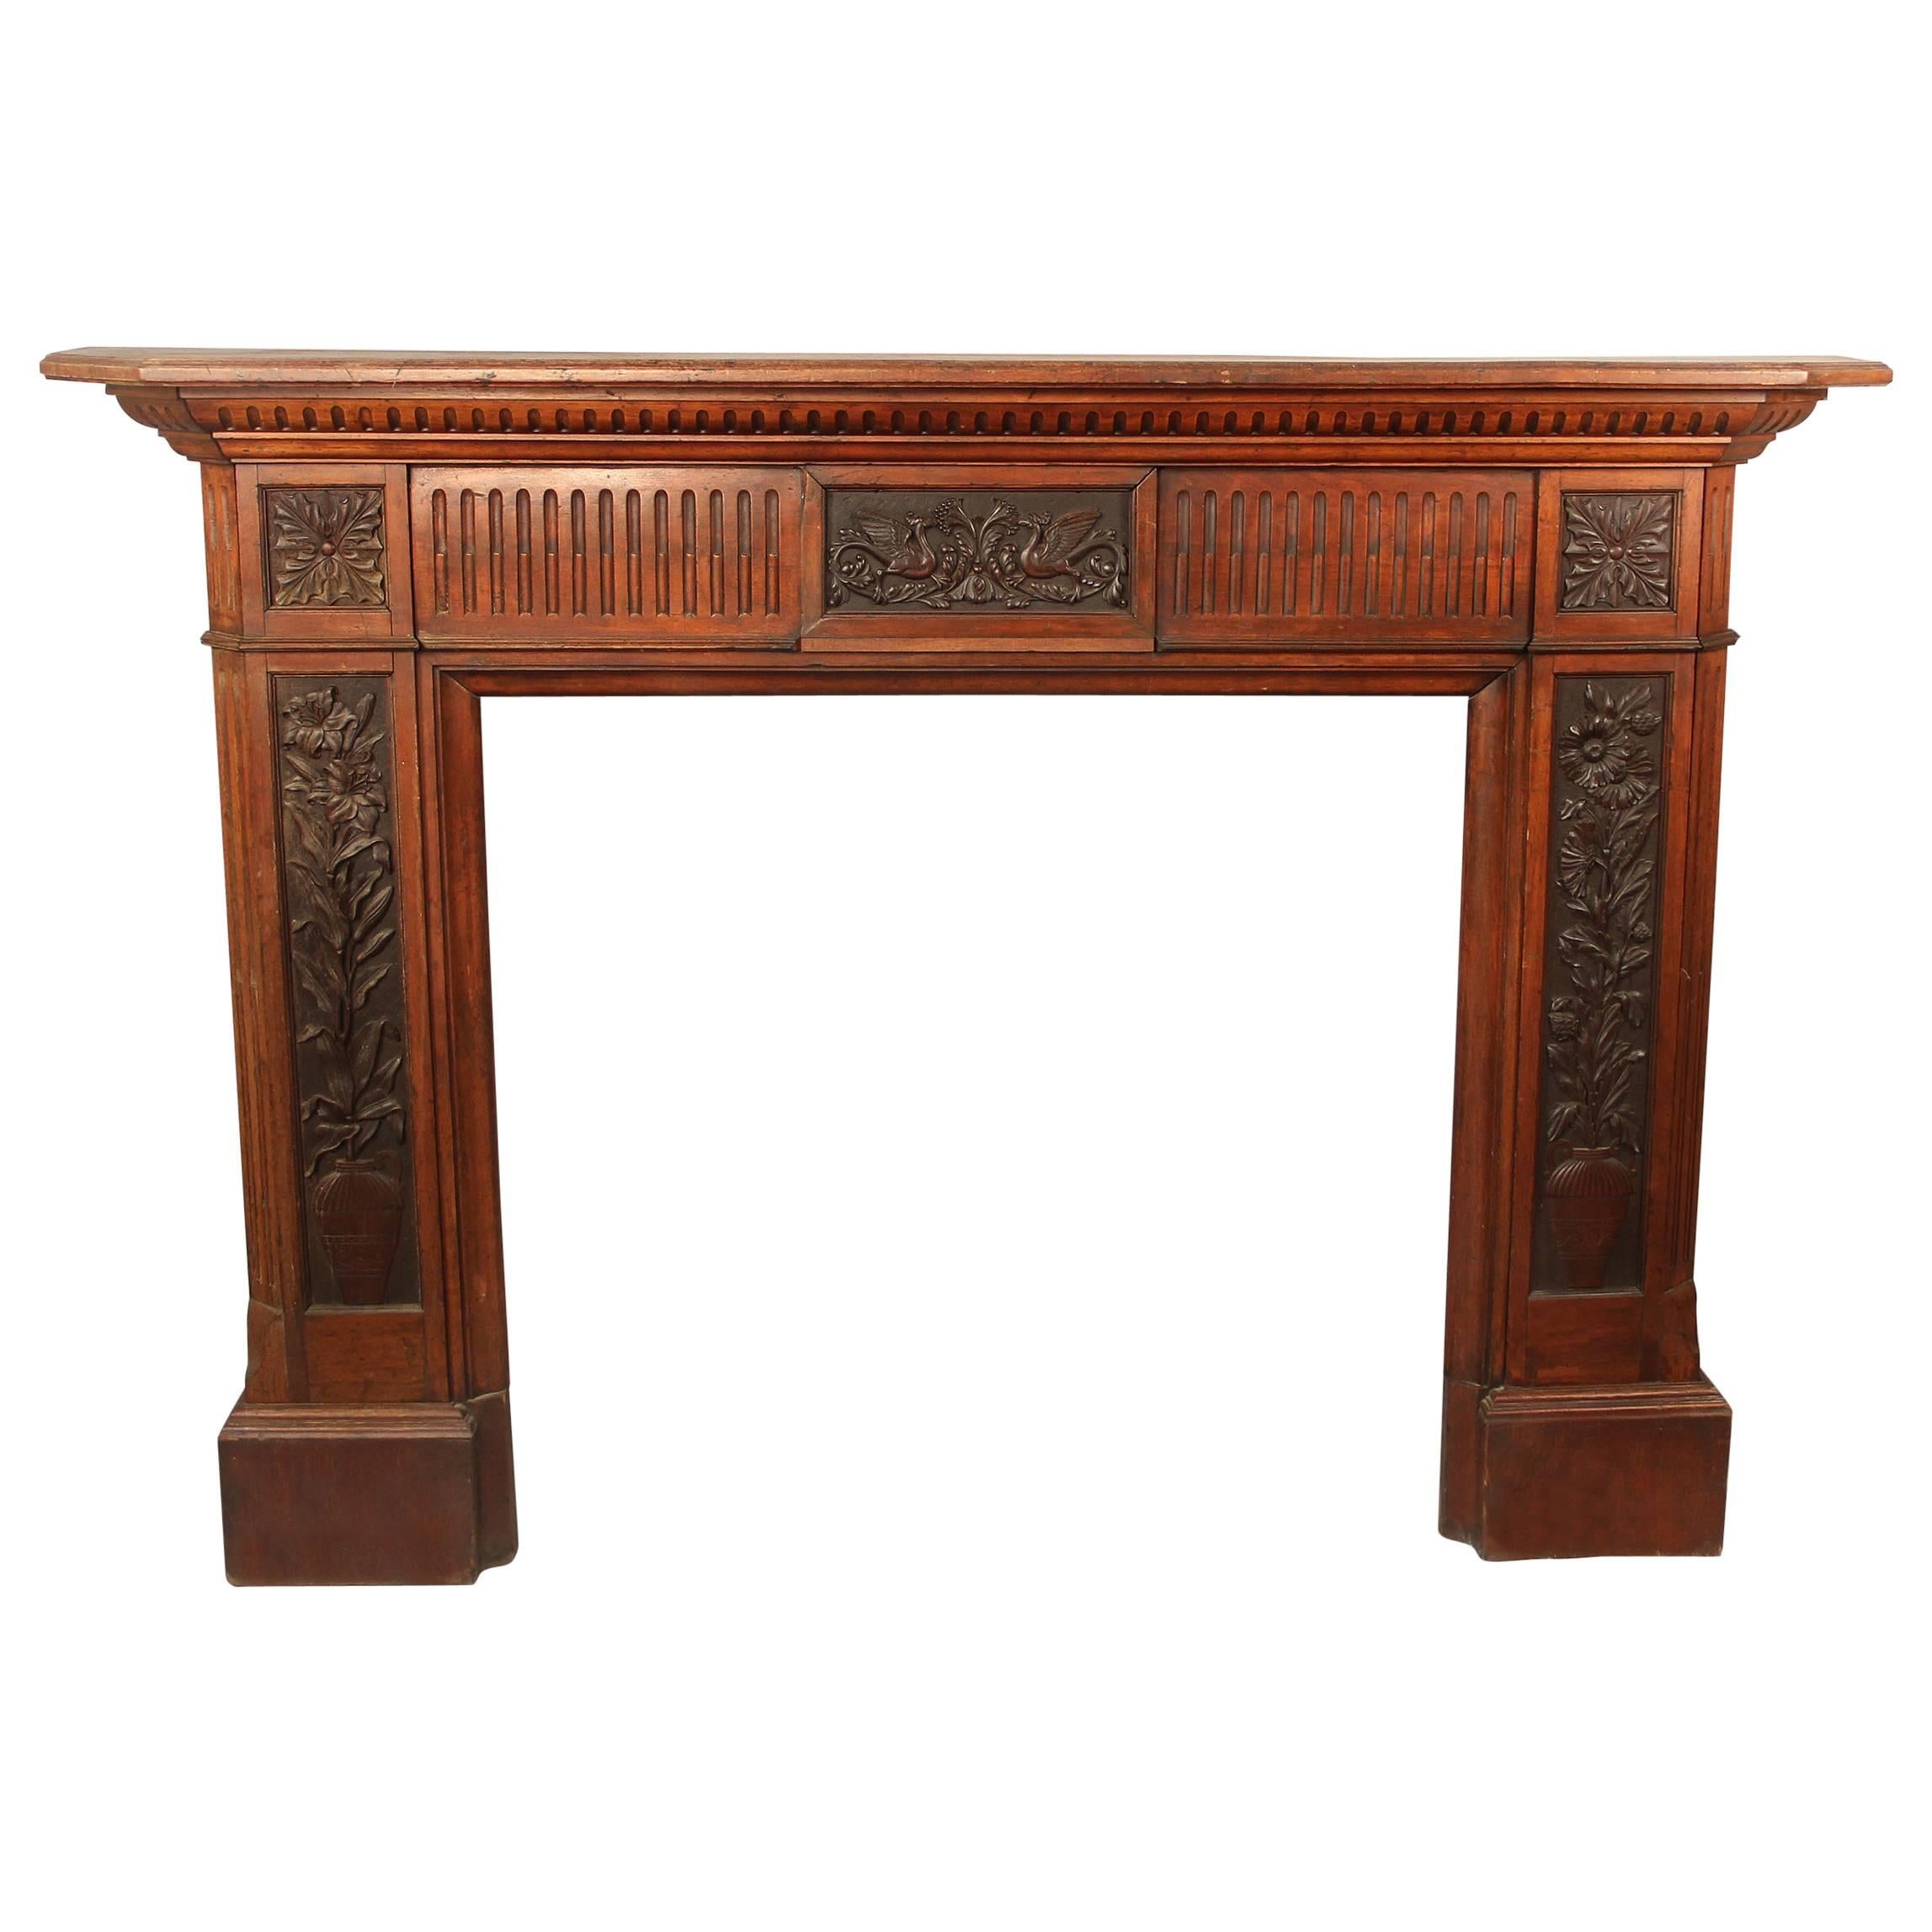 Late 19th Century Louis XVI Style Carved Wood Fireplace Surround For Sale